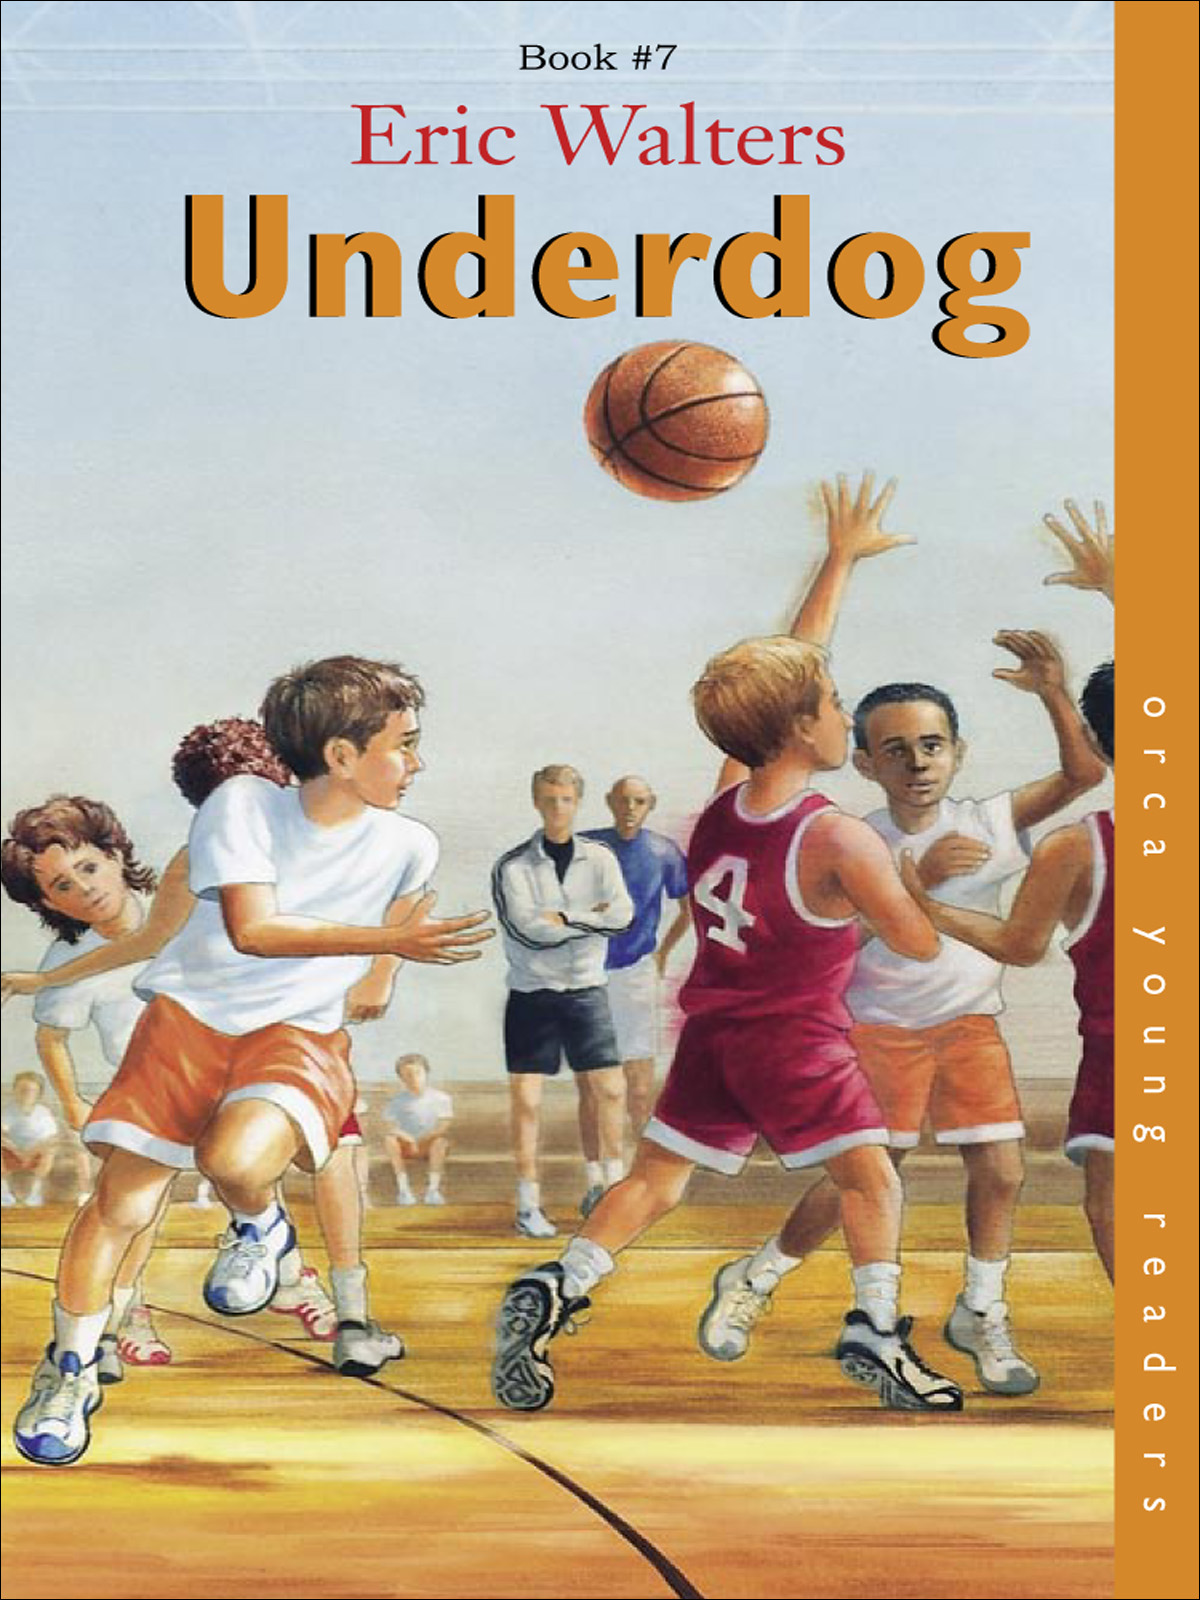 Underdog (2004) by Eric Walters